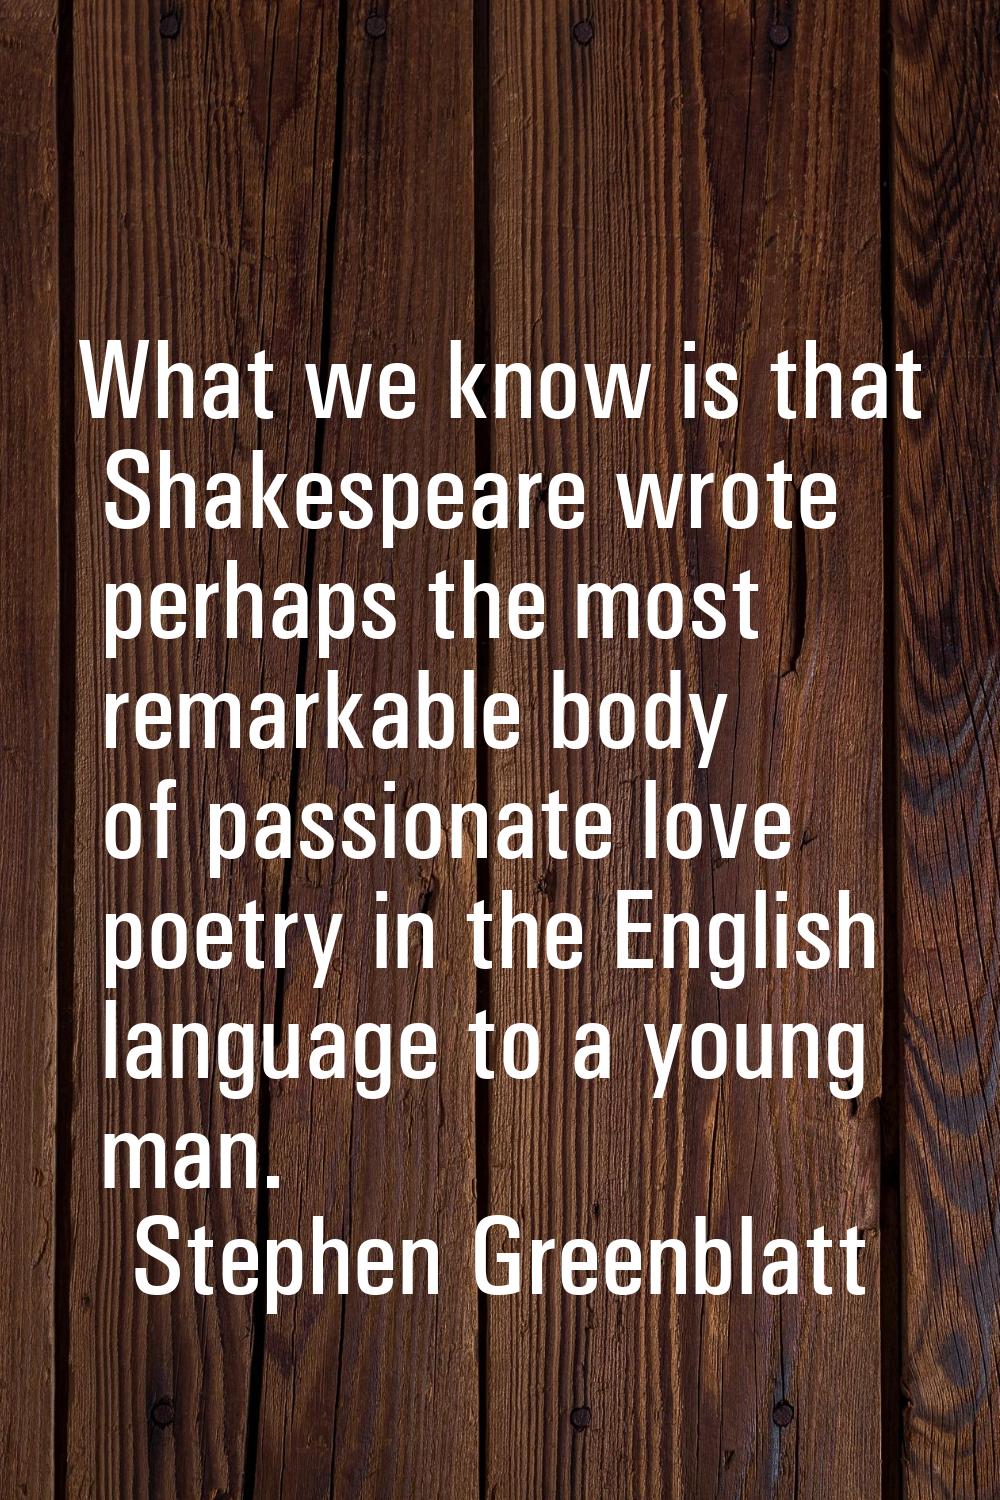 What we know is that Shakespeare wrote perhaps the most remarkable body of passionate love poetry i